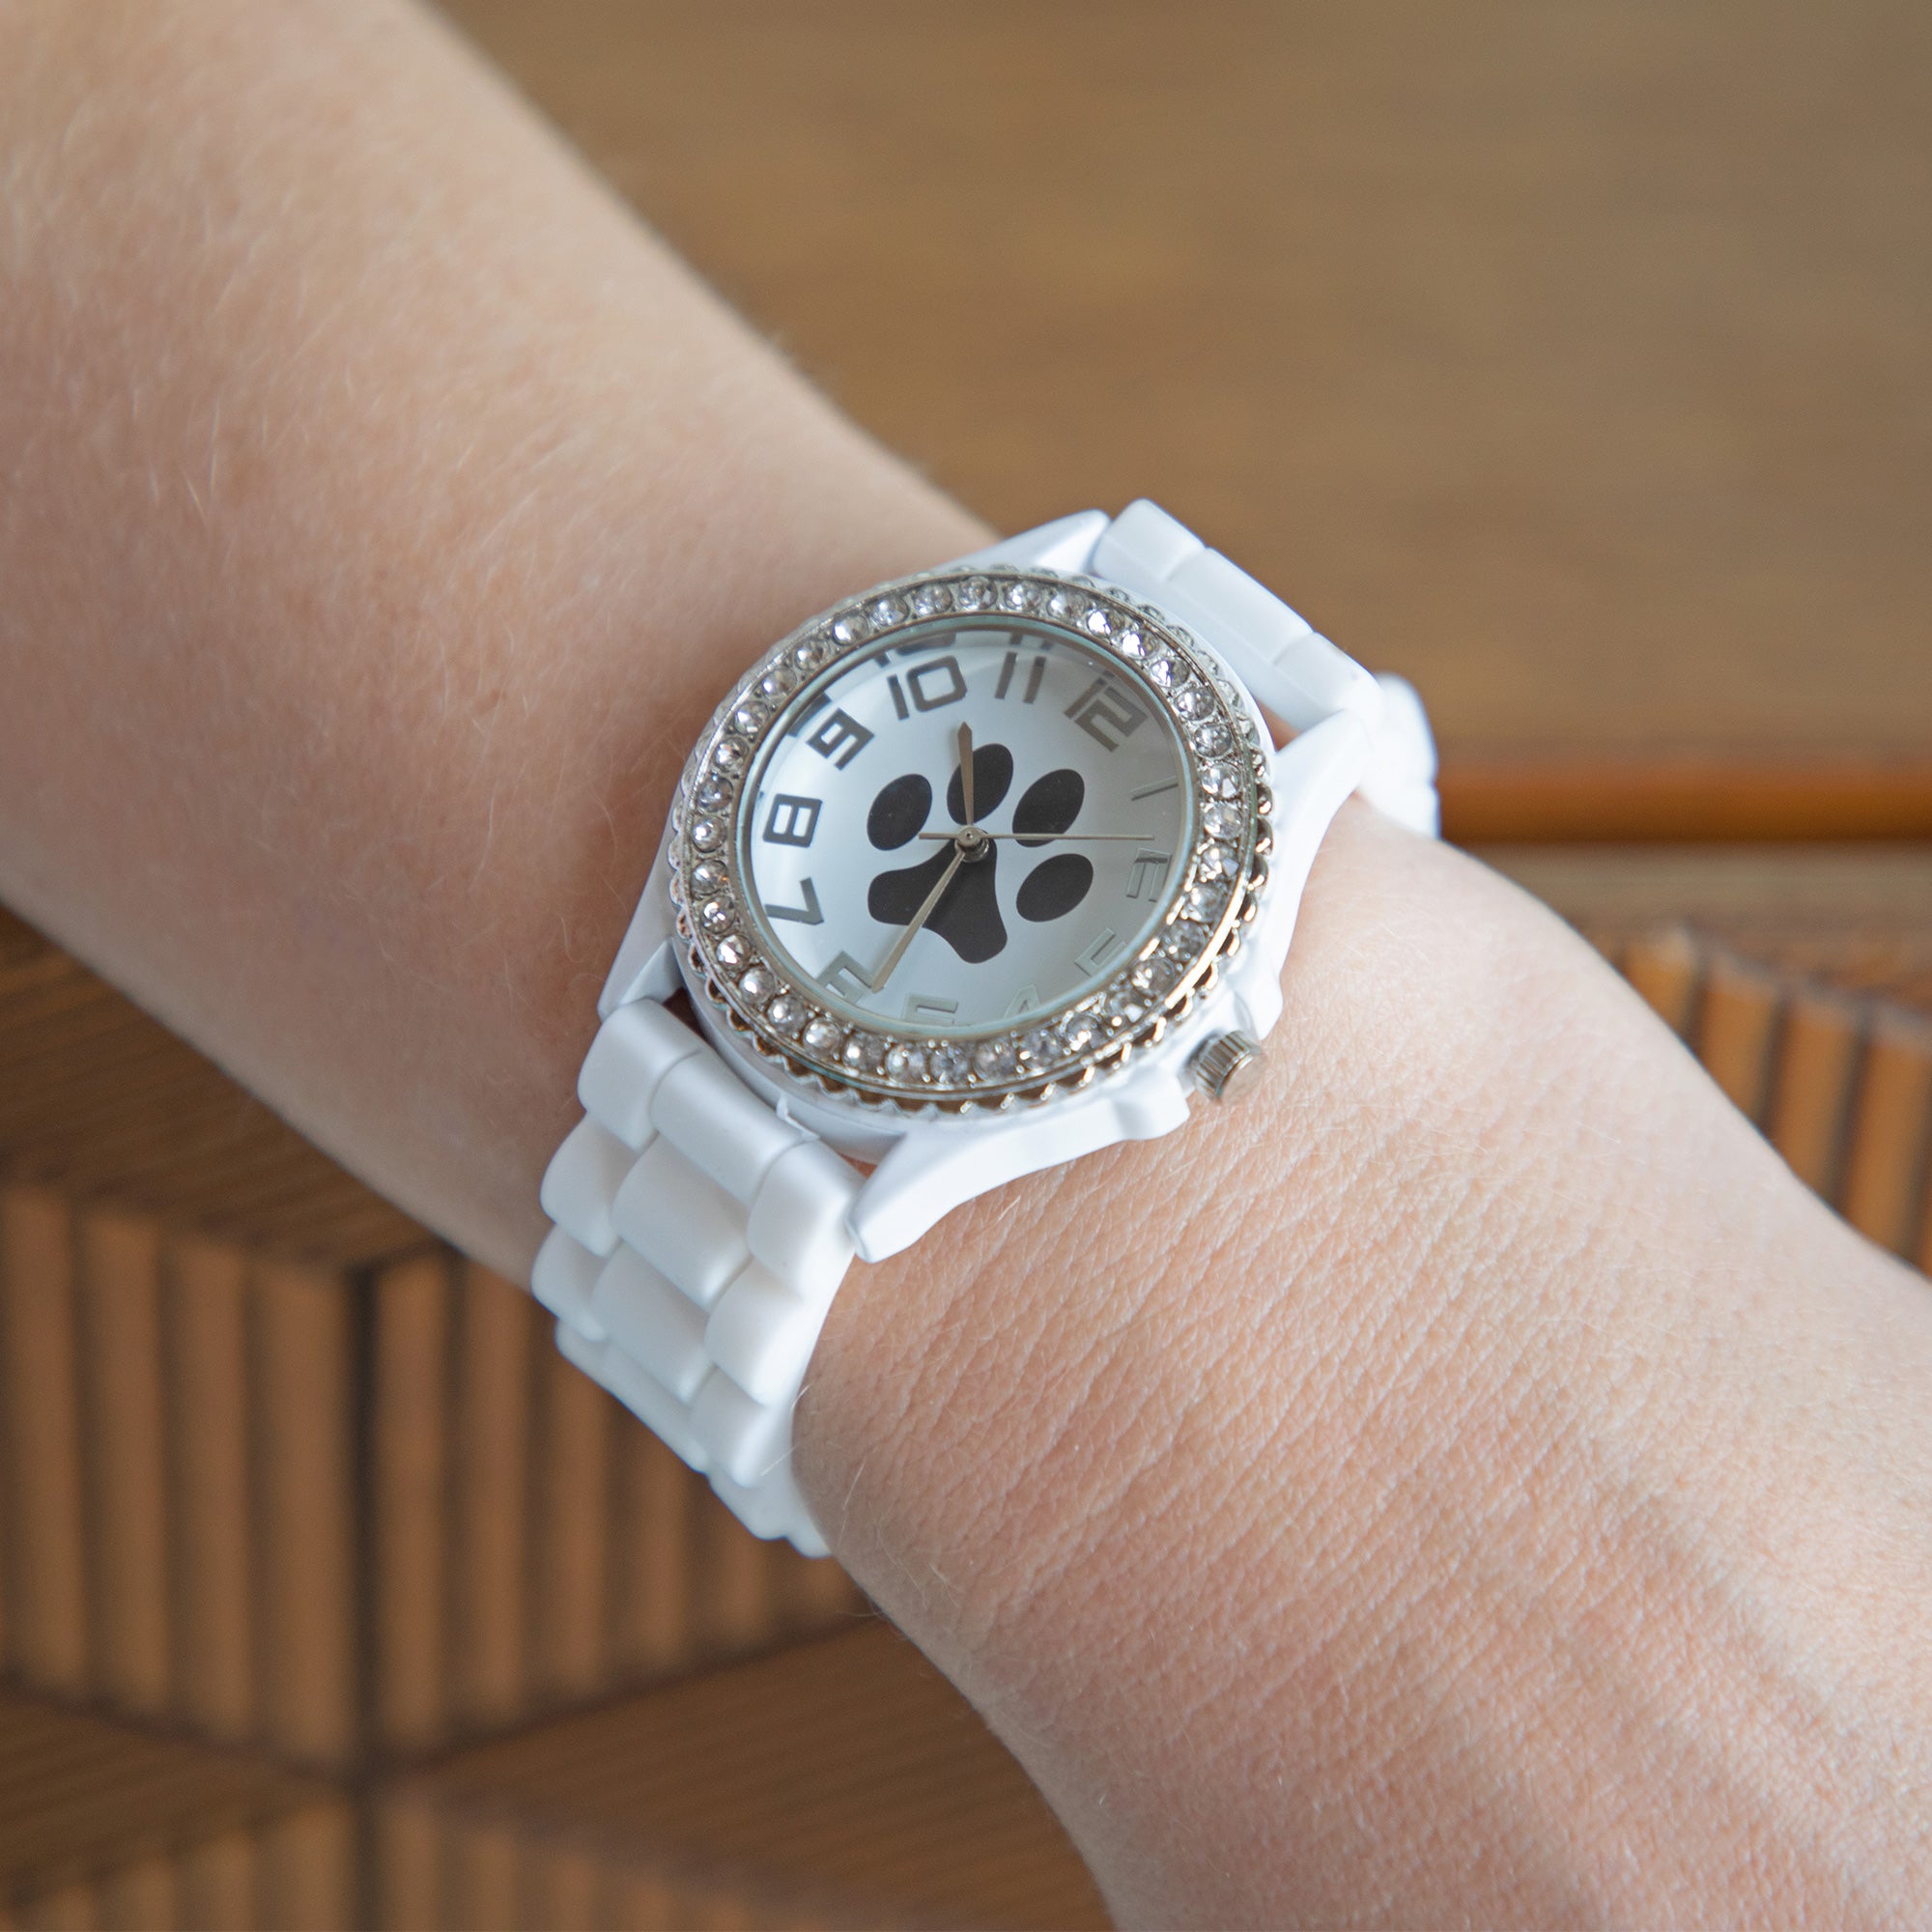 Paw Print Silicone Watch - White